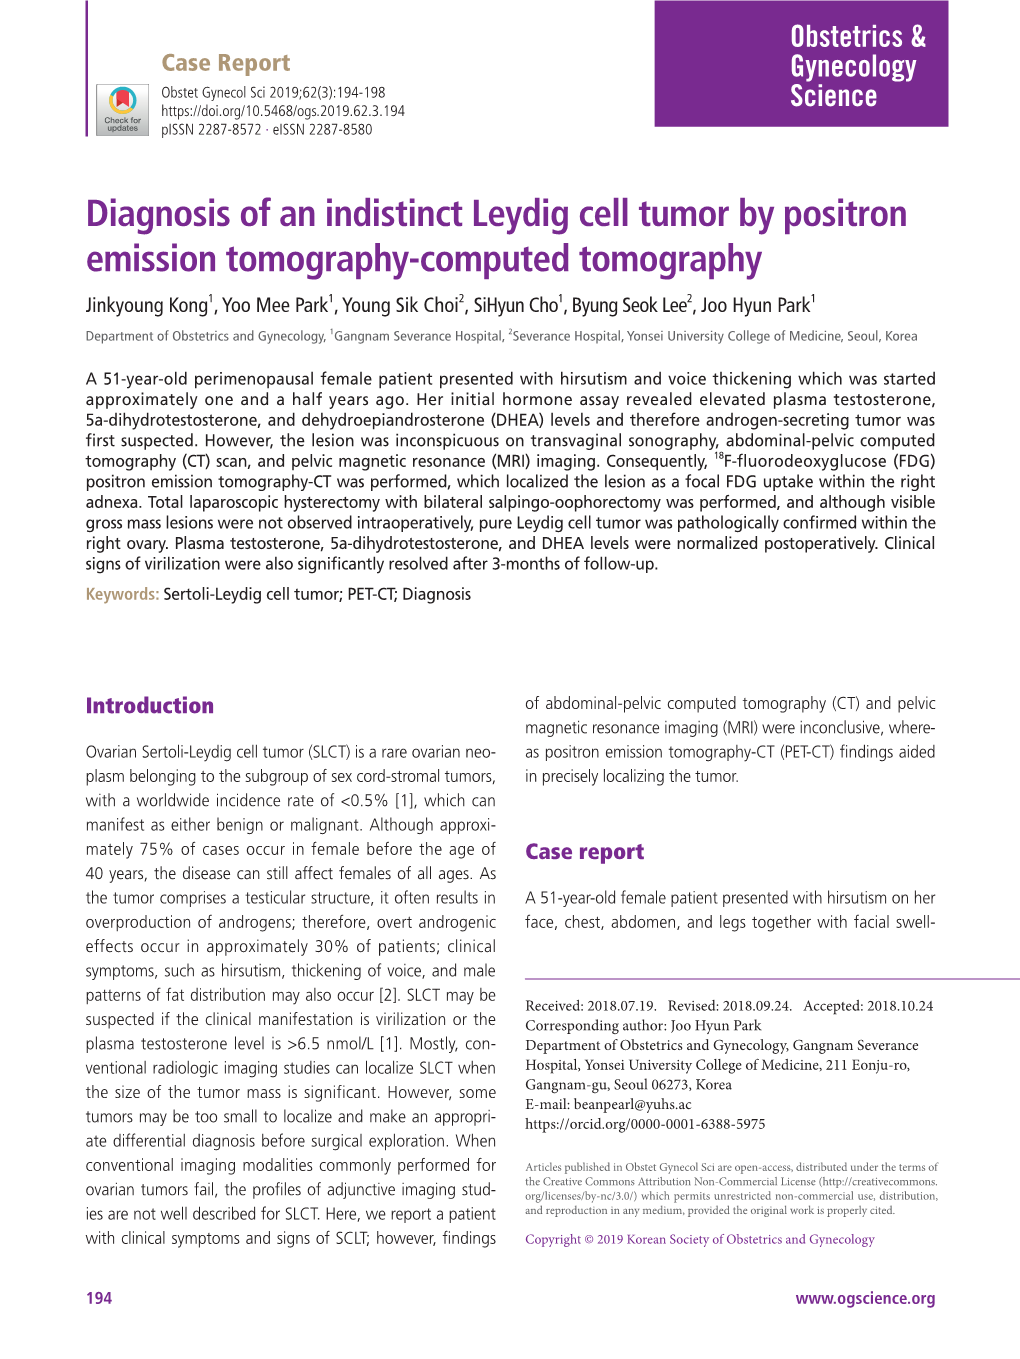 Diagnosis of an Indistinct Leydig Cell Tumor by Positron Emission